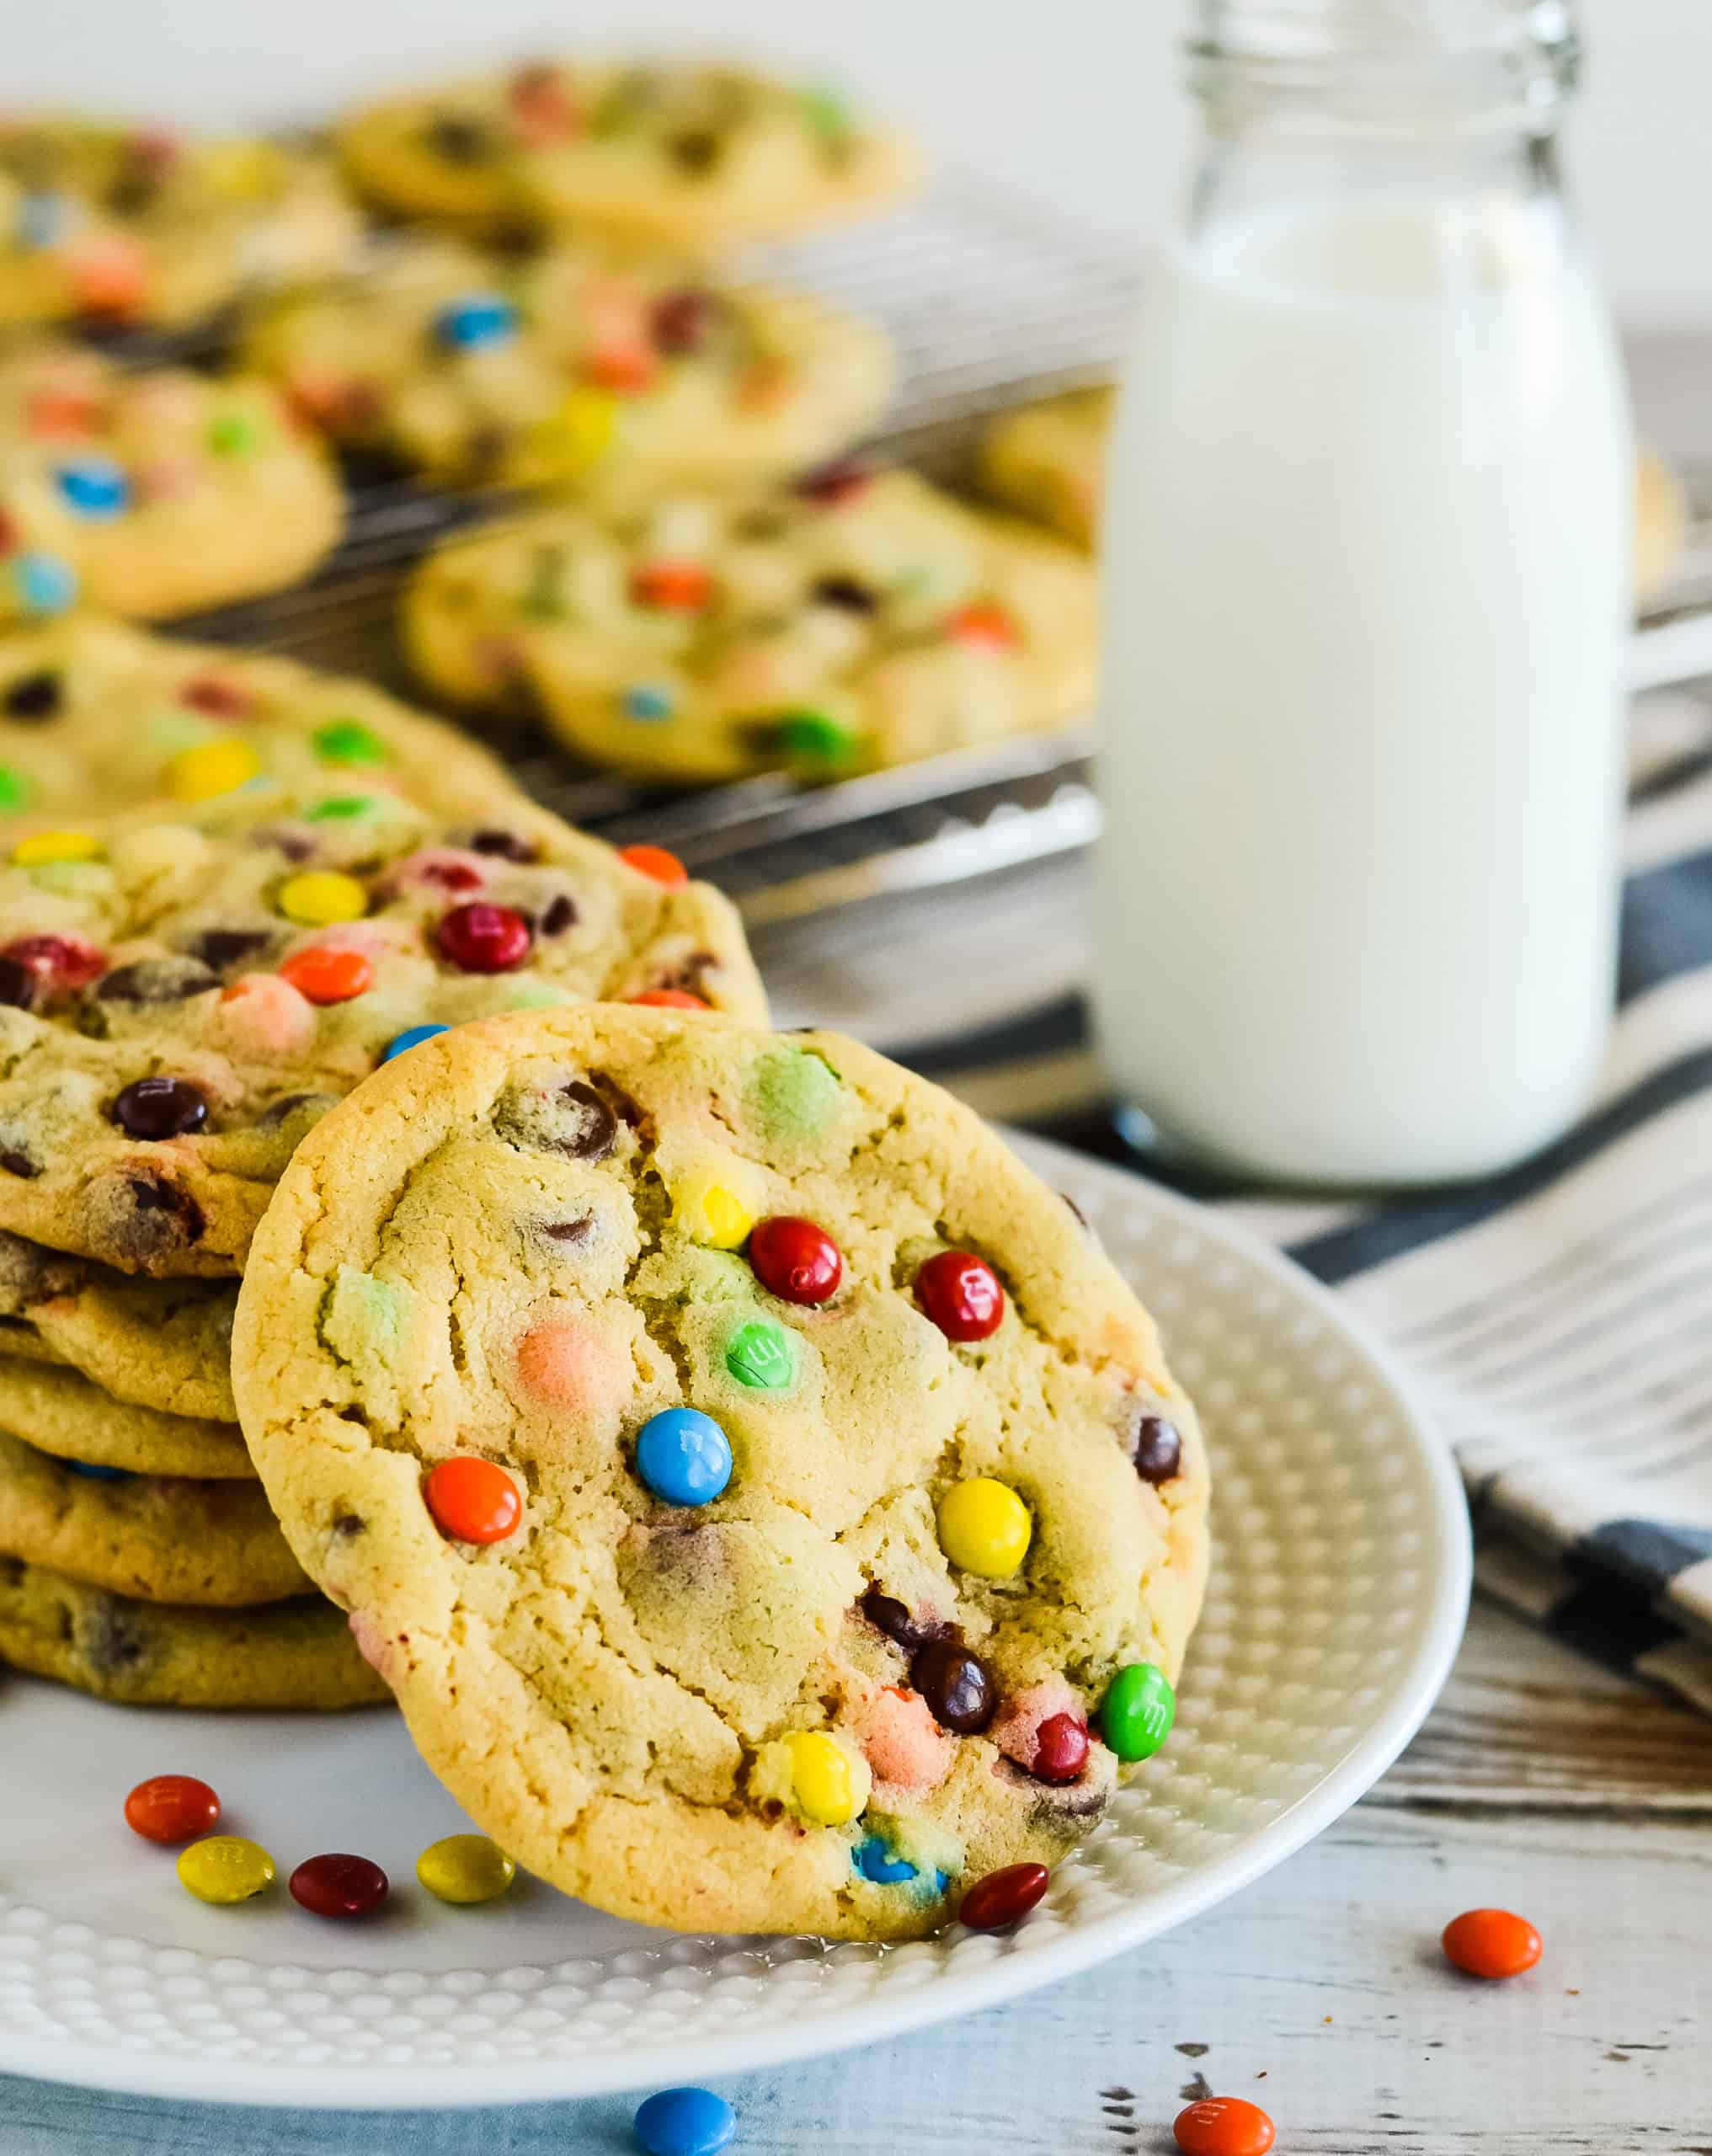 Chocolate M&M Cookies - no chill M&M cookies!